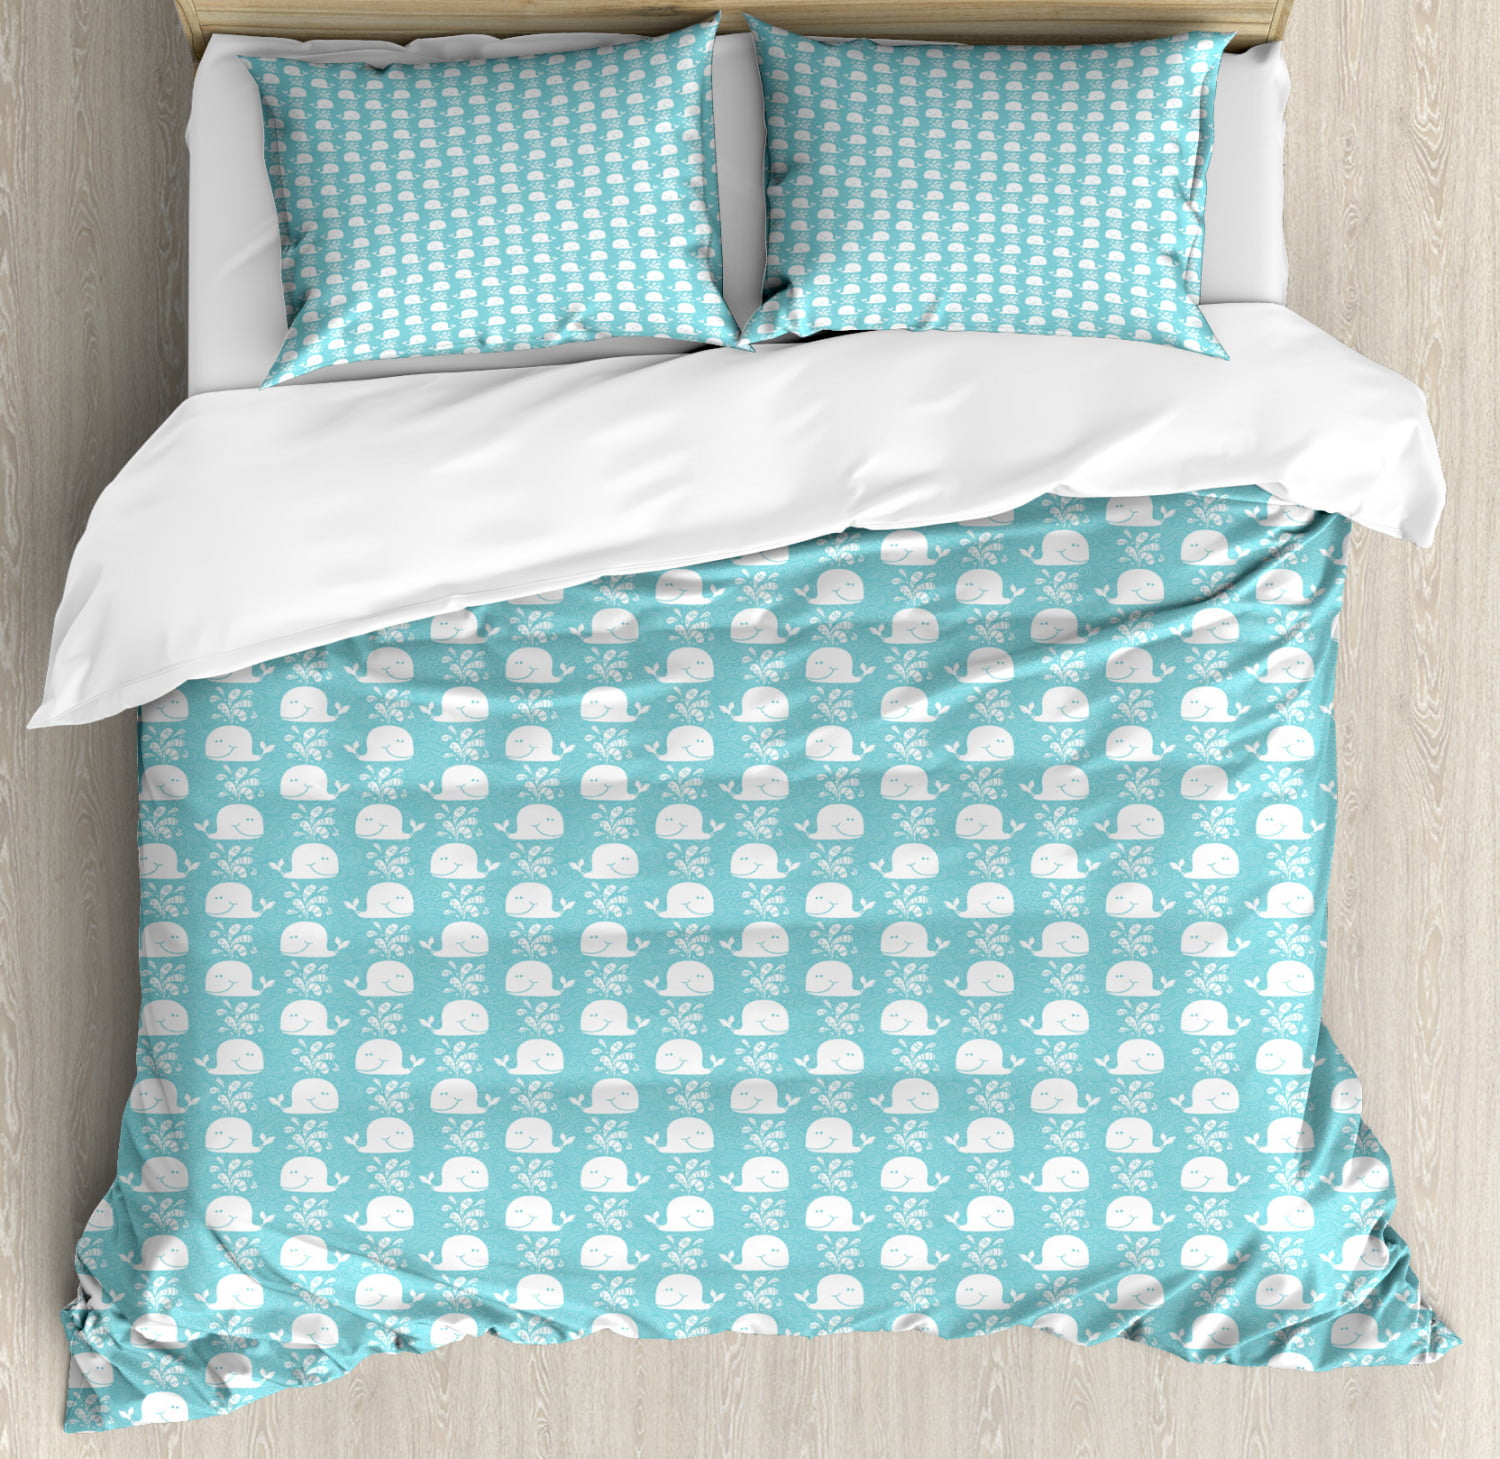 Blue and White Duvet Cover Set King Size, Doodle Pattern with Waves and Funny Whales Ocean Life